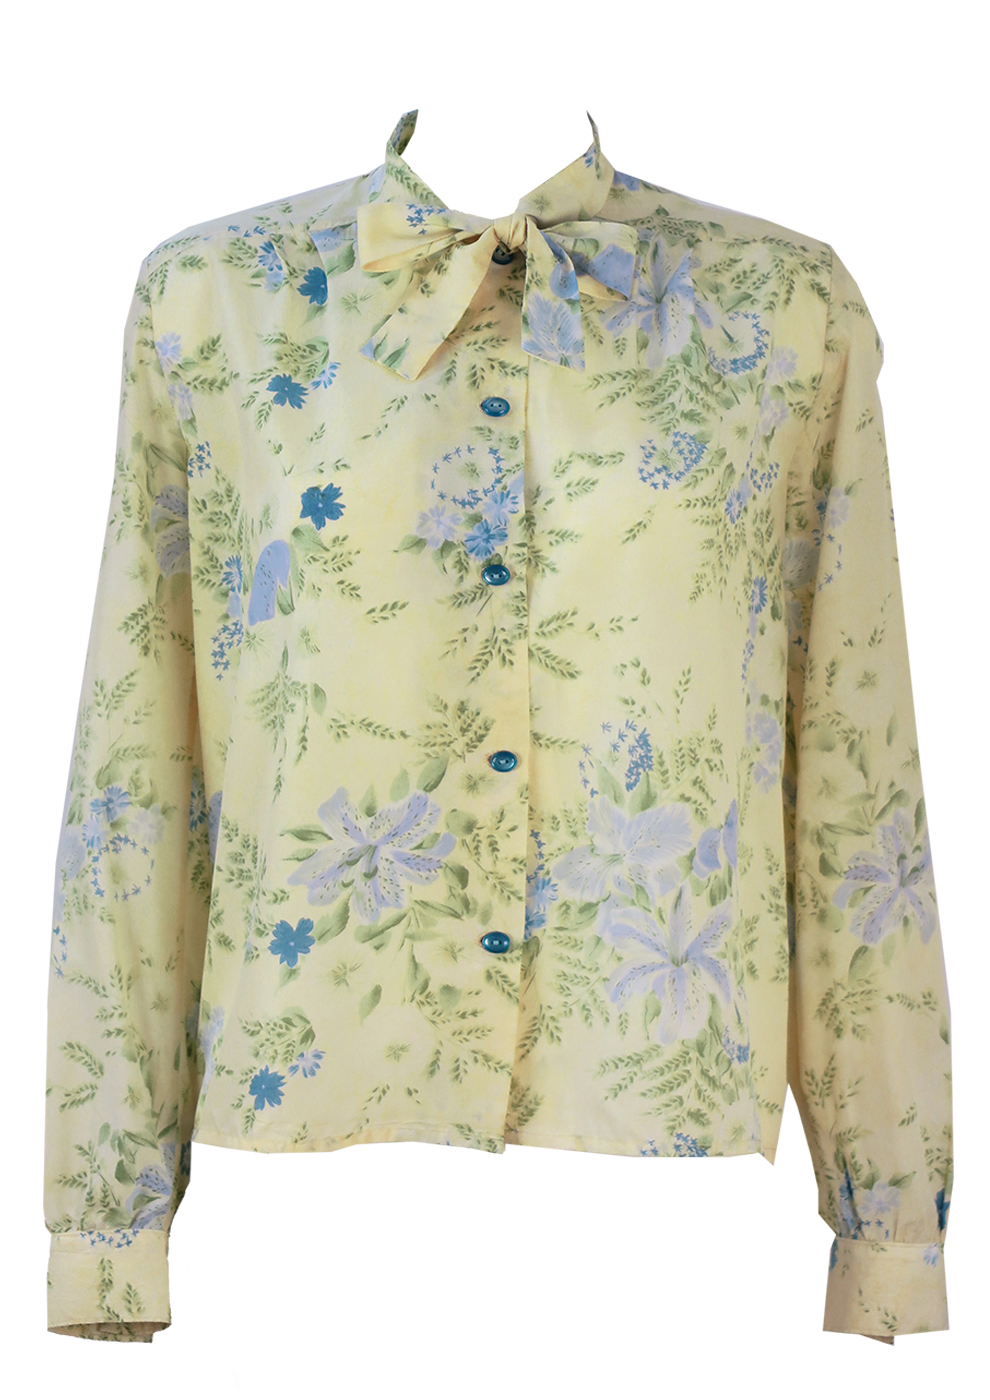 Vintage 70's Pussy Bow Blouse with Delicate Blue & Green Floral Pattern ...